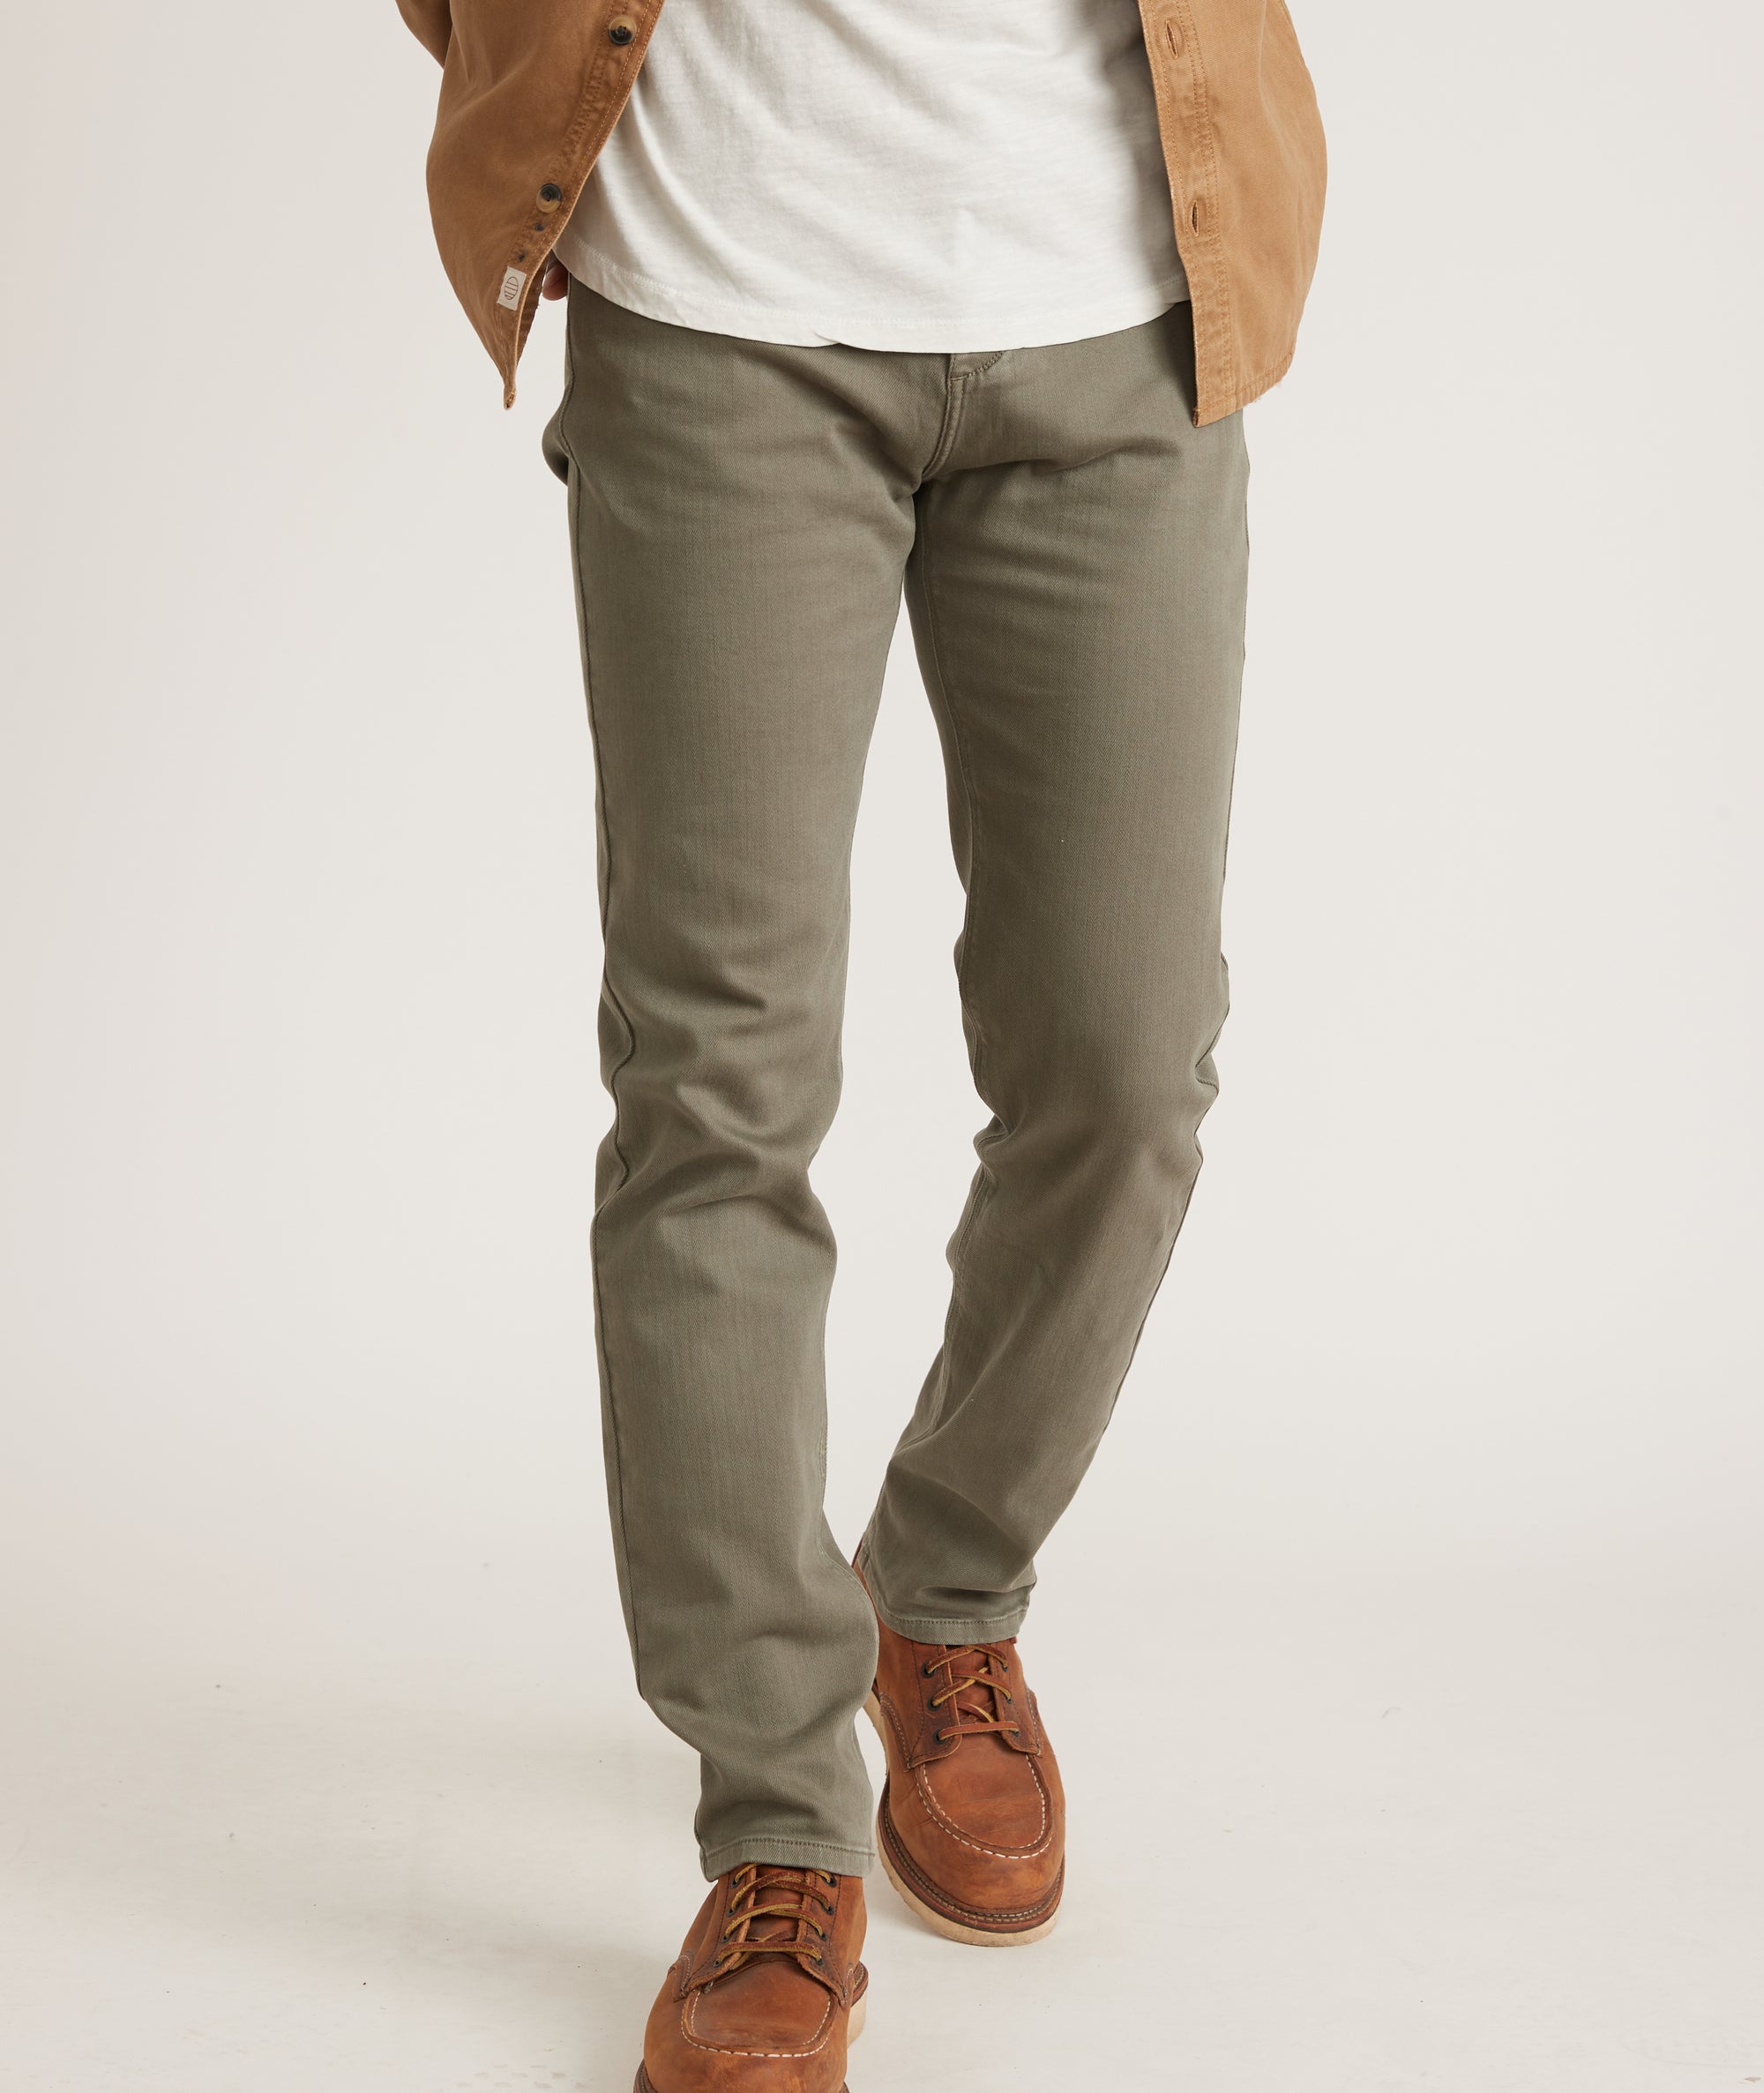 5 Pocket Pant Slim Fit in Faded Olive – Marine Layer | Weite Hosen